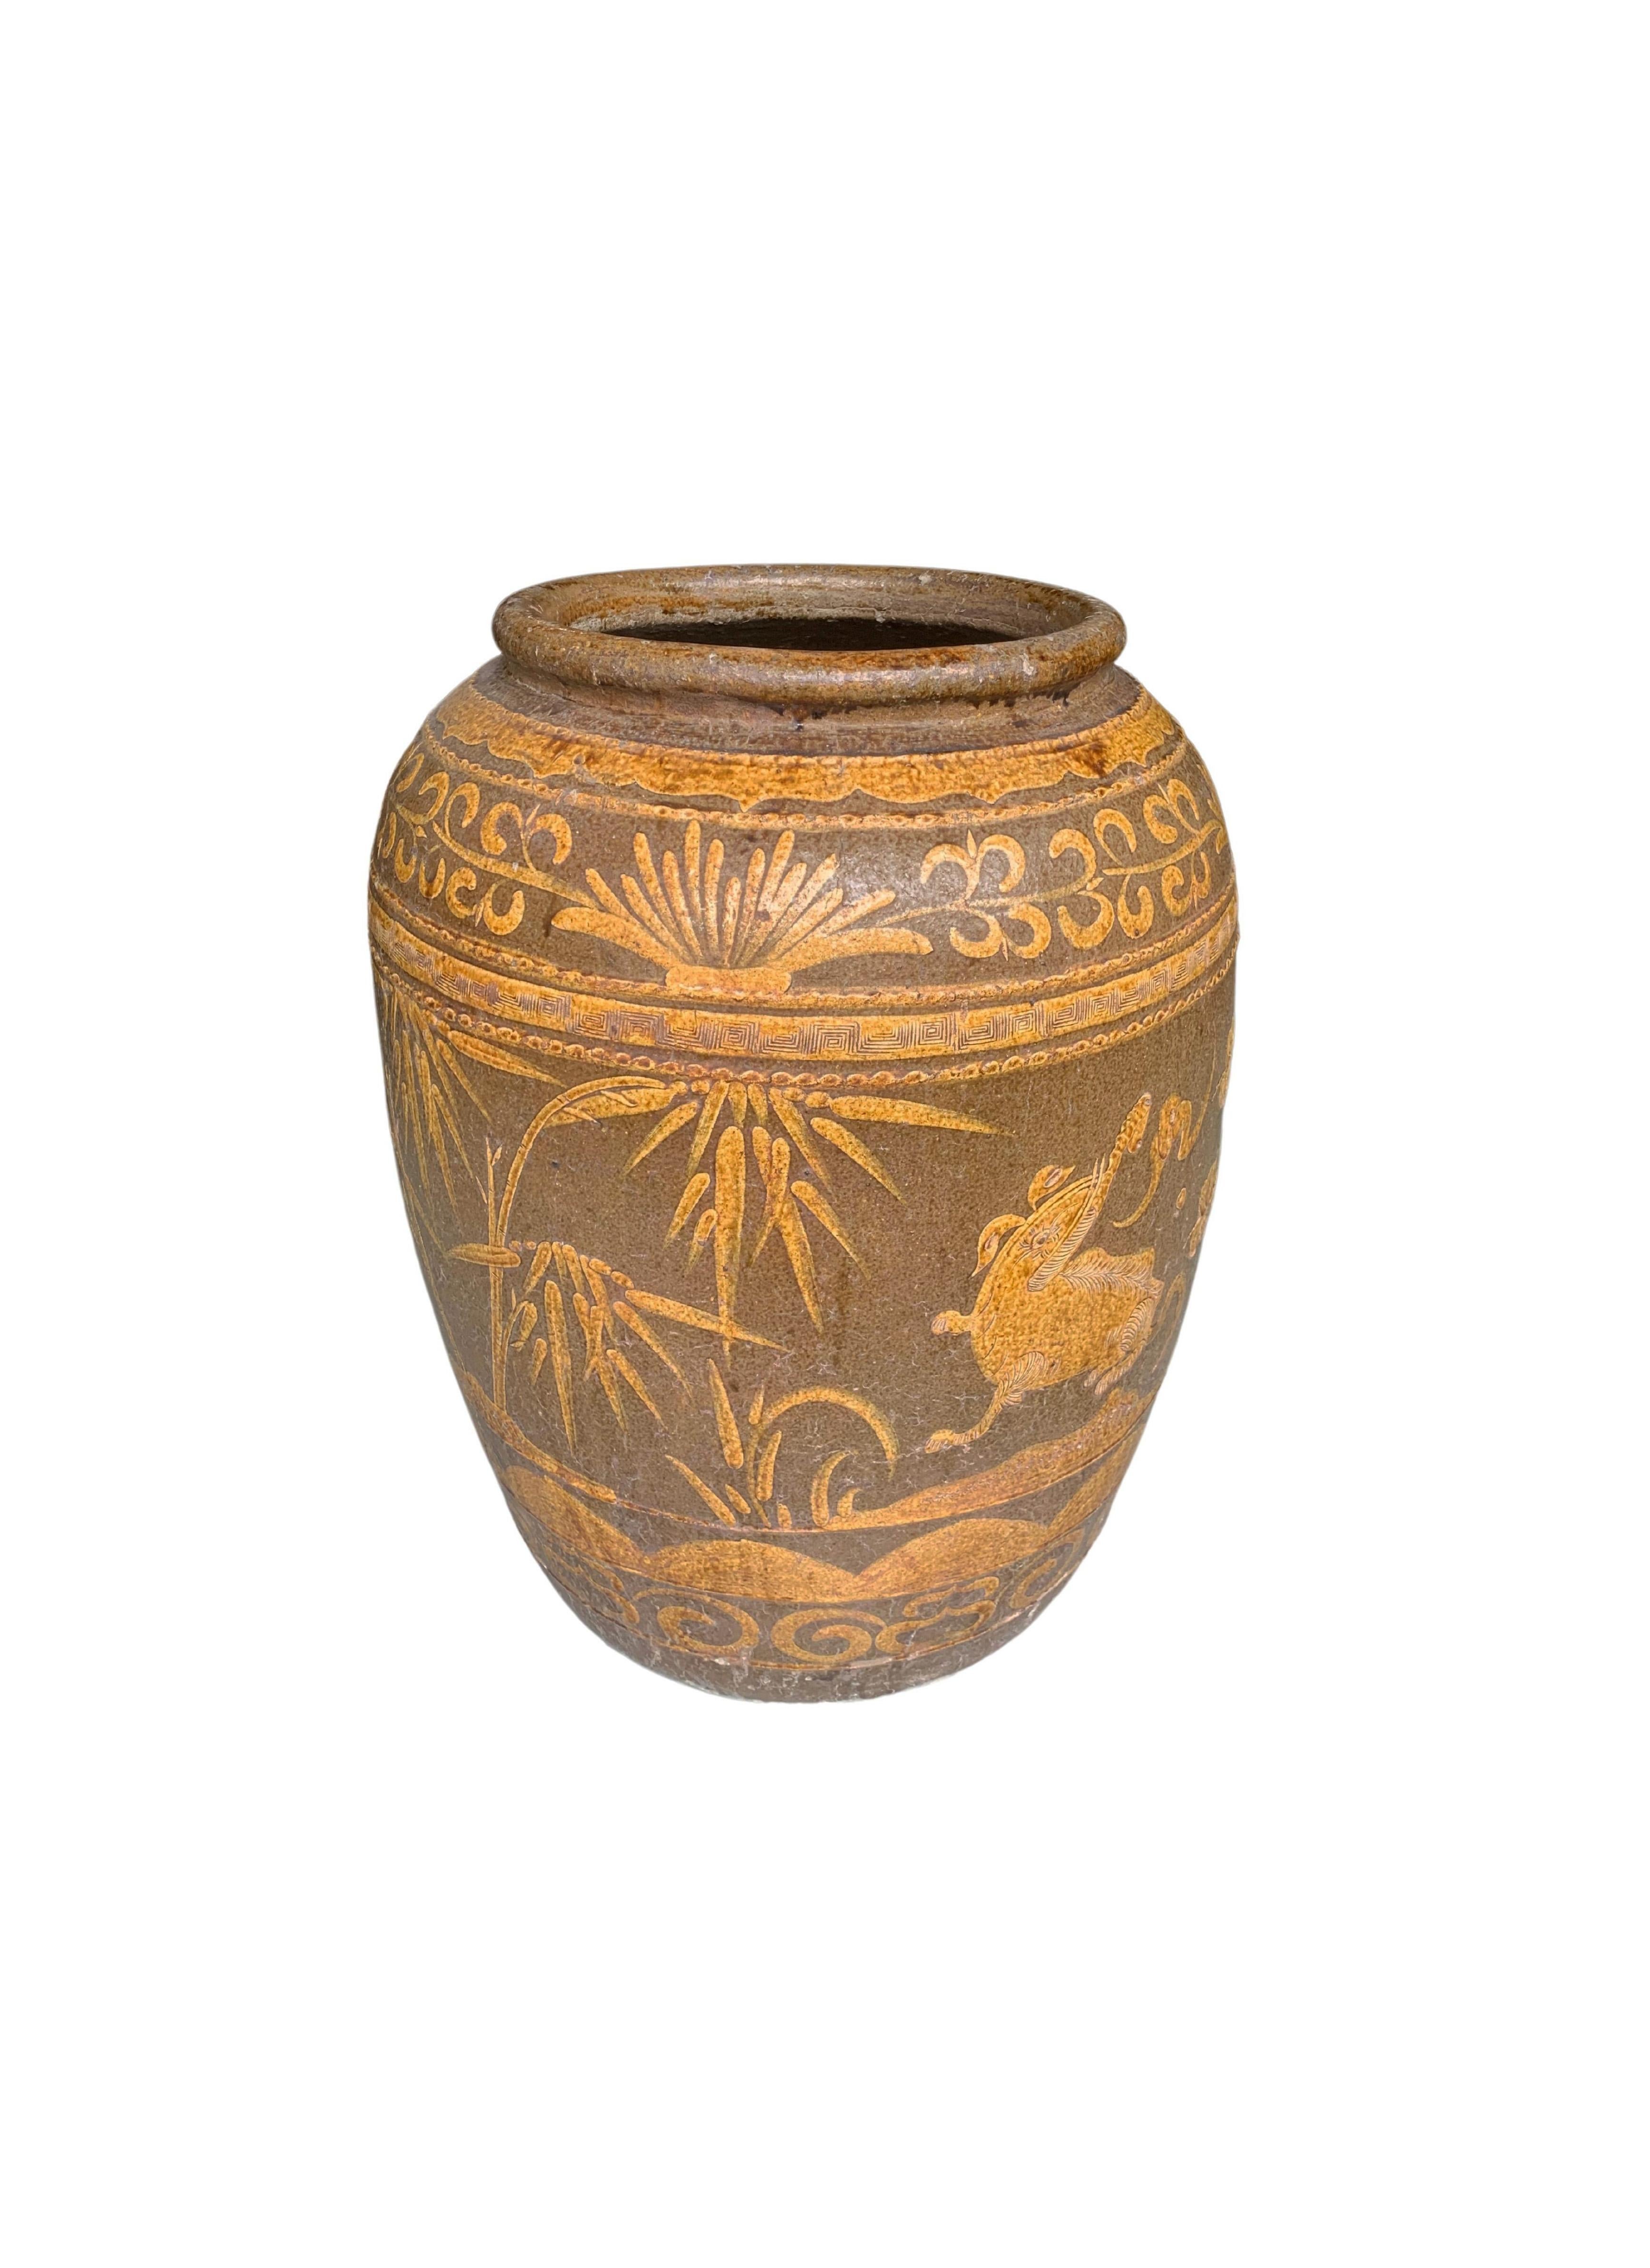 Chinese Qing Dynasty Hand-Painted Glazed Pickling Jar, c. 1900 For Sale